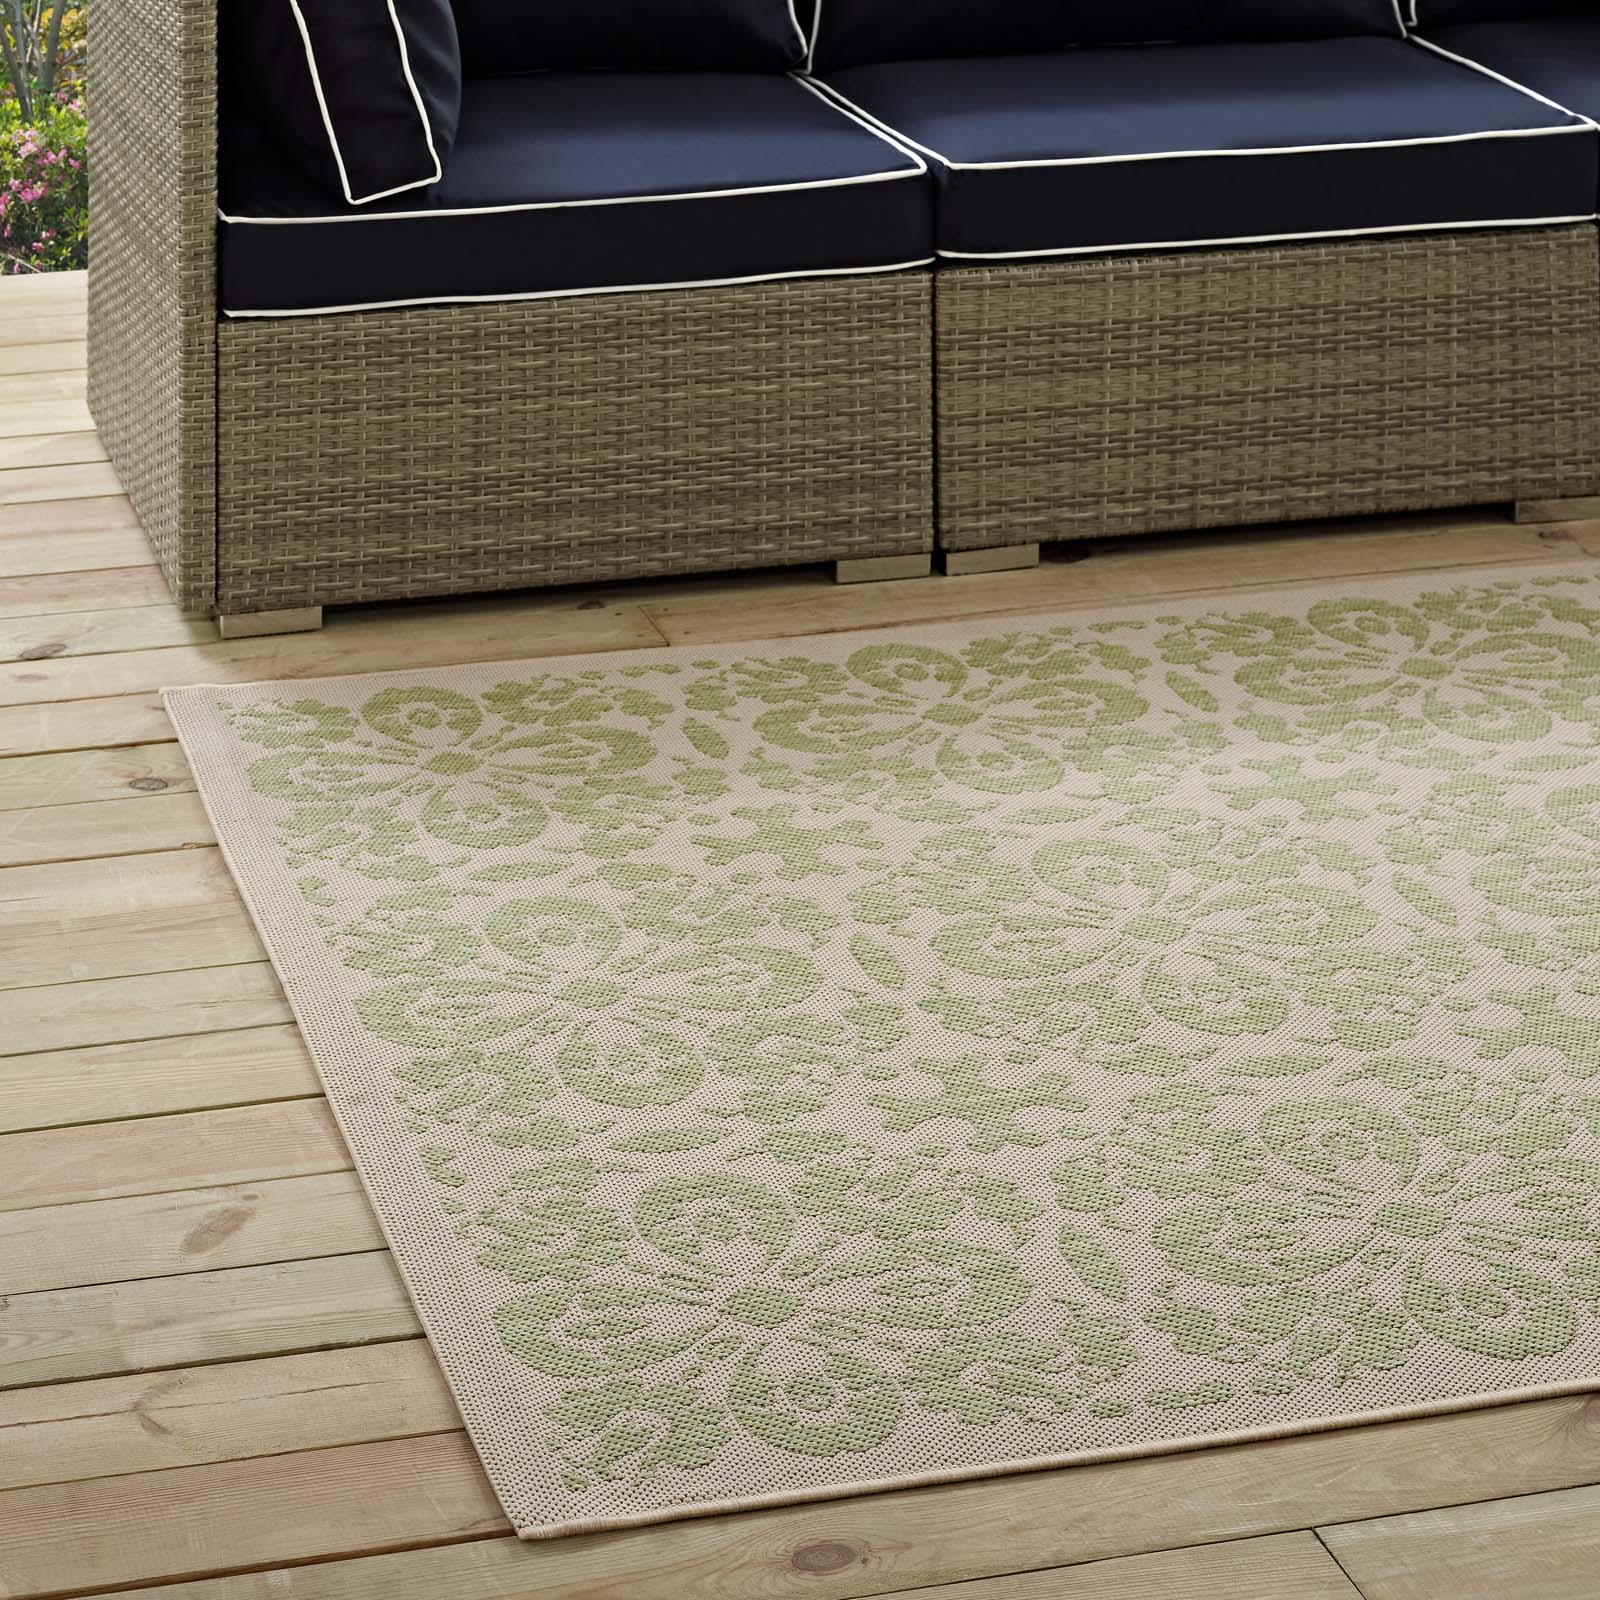 Modway Outdoor Rugs - Ariana Vintage Floral Trellis 9'x12' Outdoor Area Rug Light Green & Beige